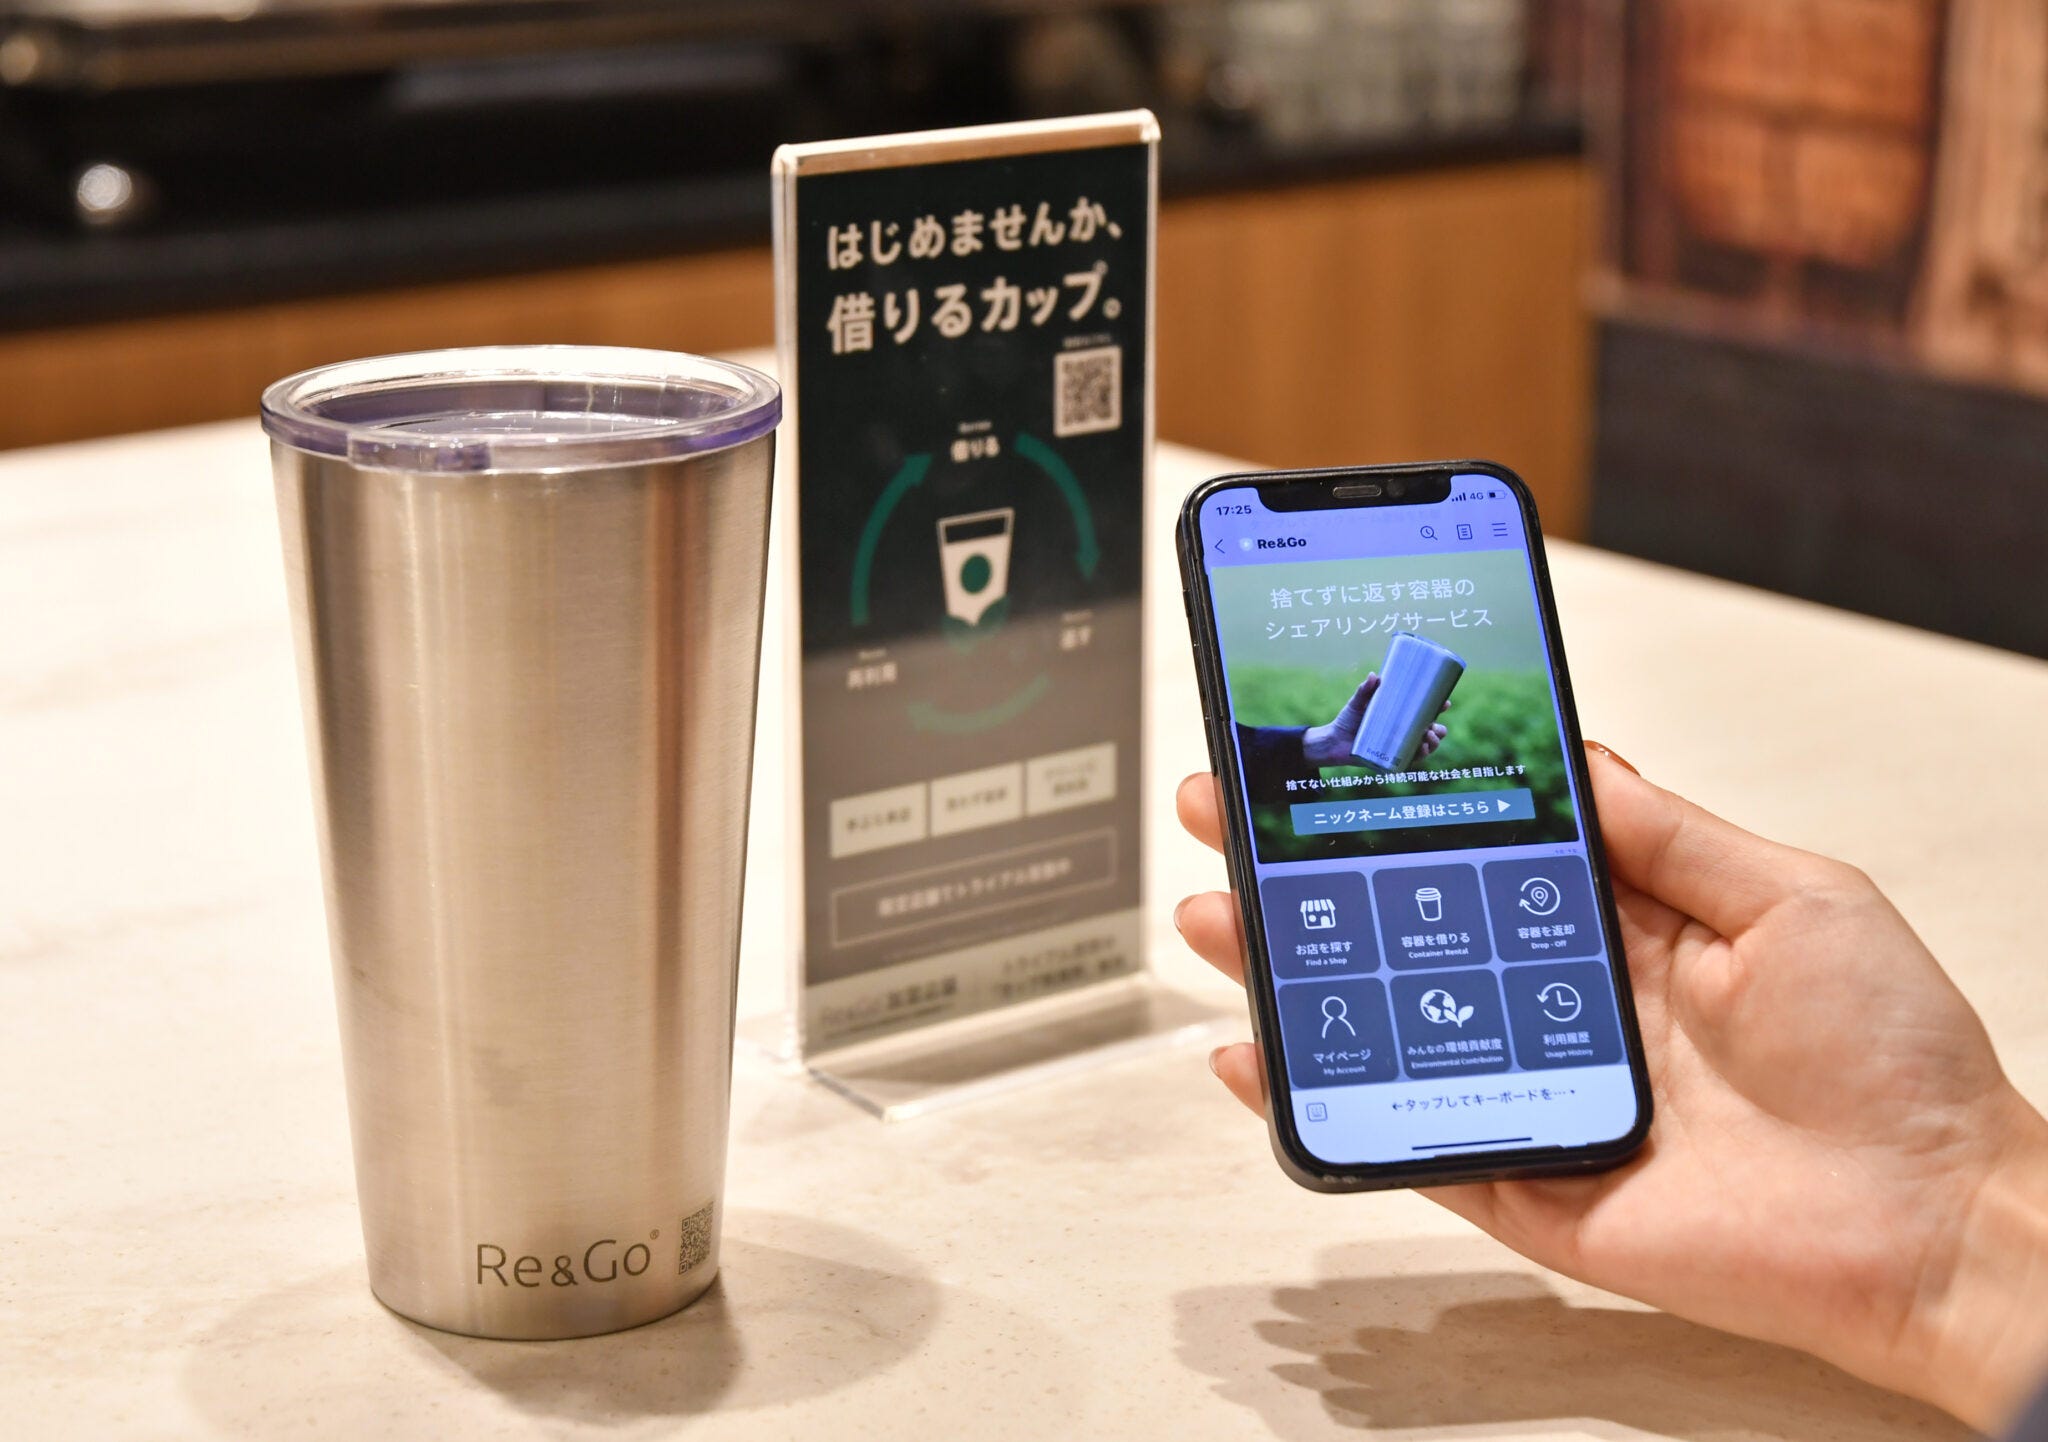 A rentable stainless steel Starbucks cup used in a pilot program in Tokyo, Japan.